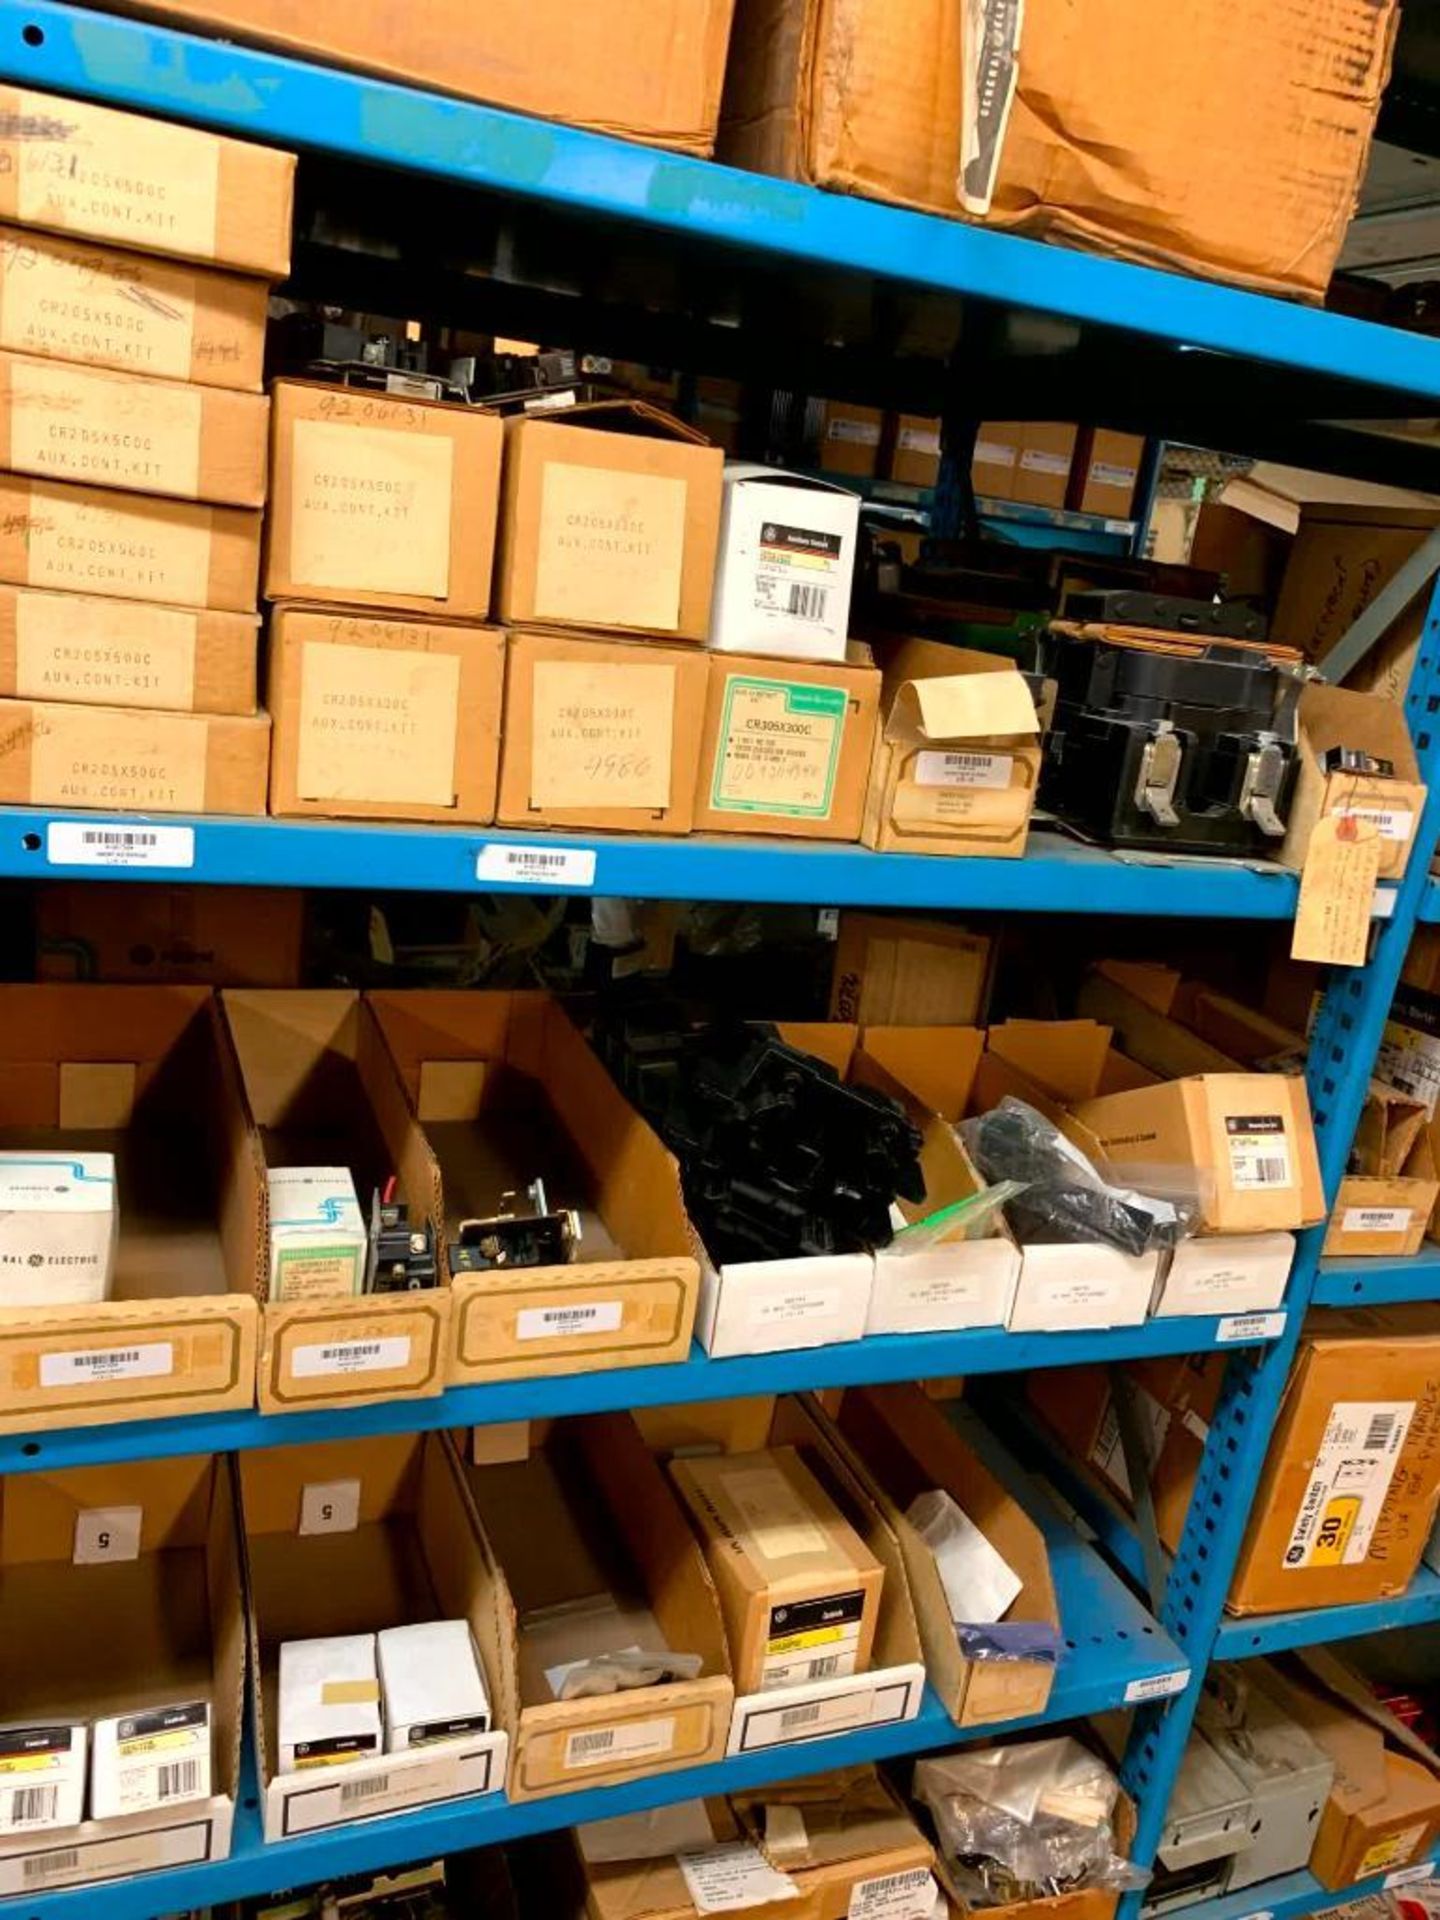 Content on (22) Bays of Clip Shelving: Transformers, Safety Switches, Magnetic Starters, Enclosures, - Image 18 of 74